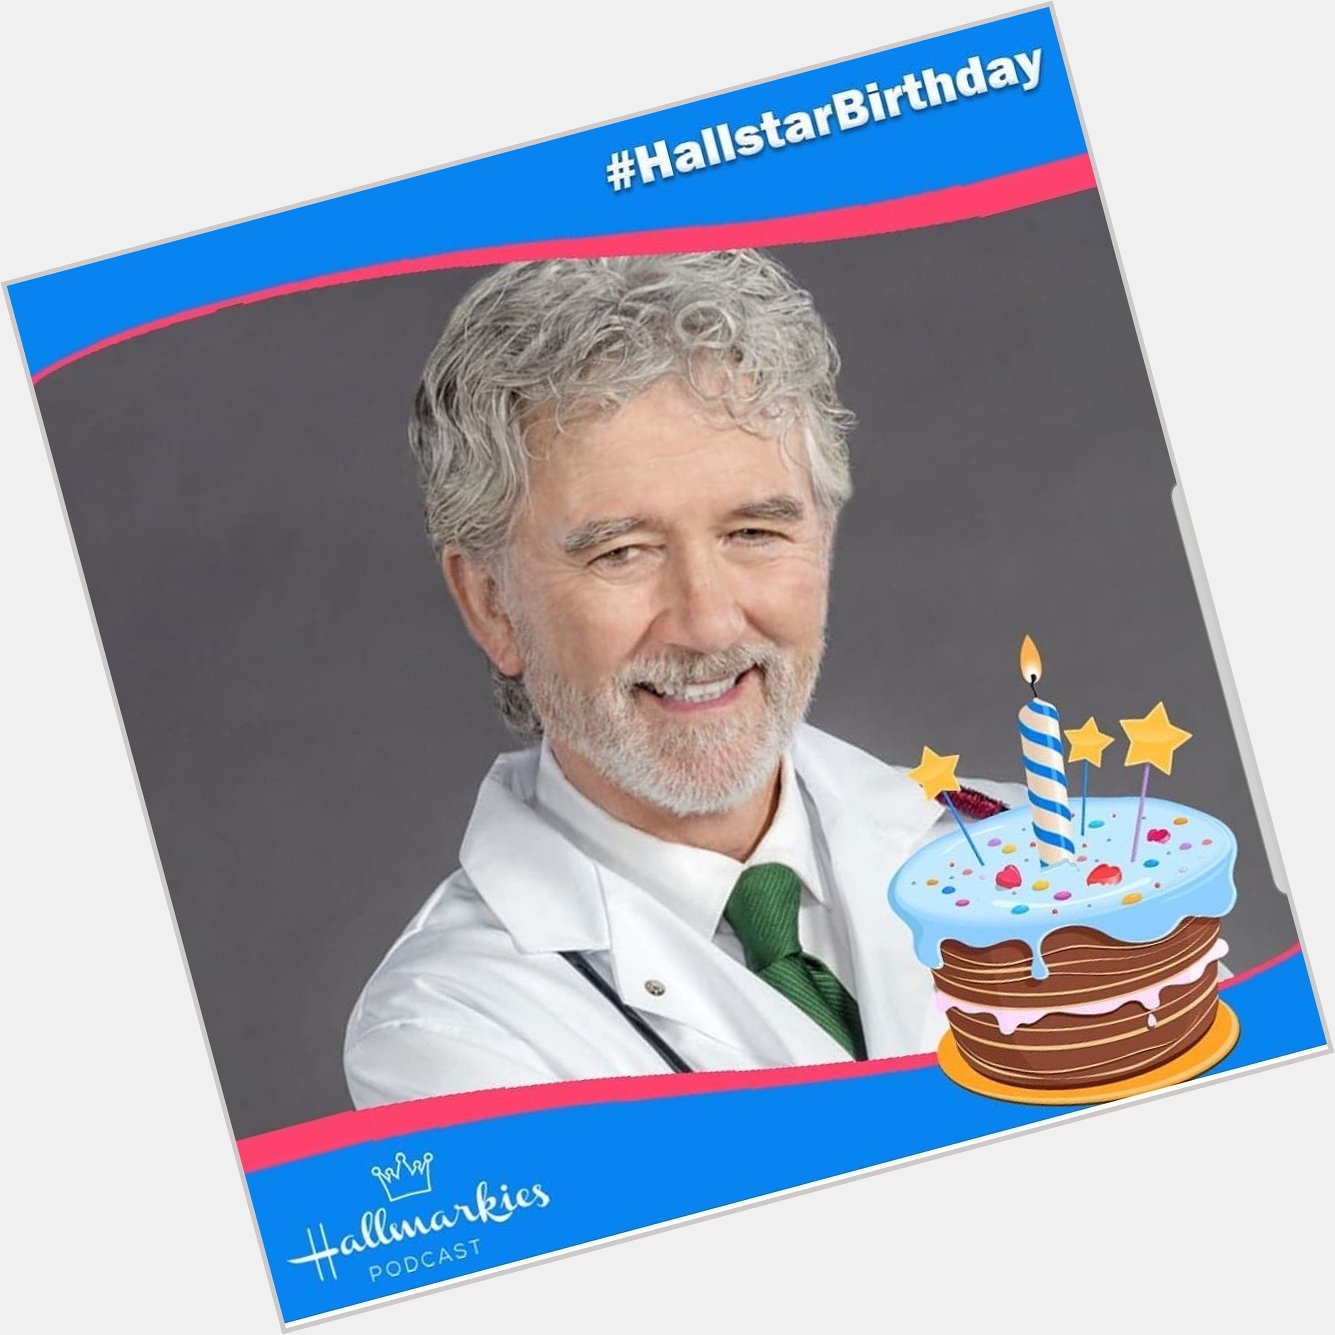 Happy Birthday to Patrick Duffy. Hope you have a great day!   